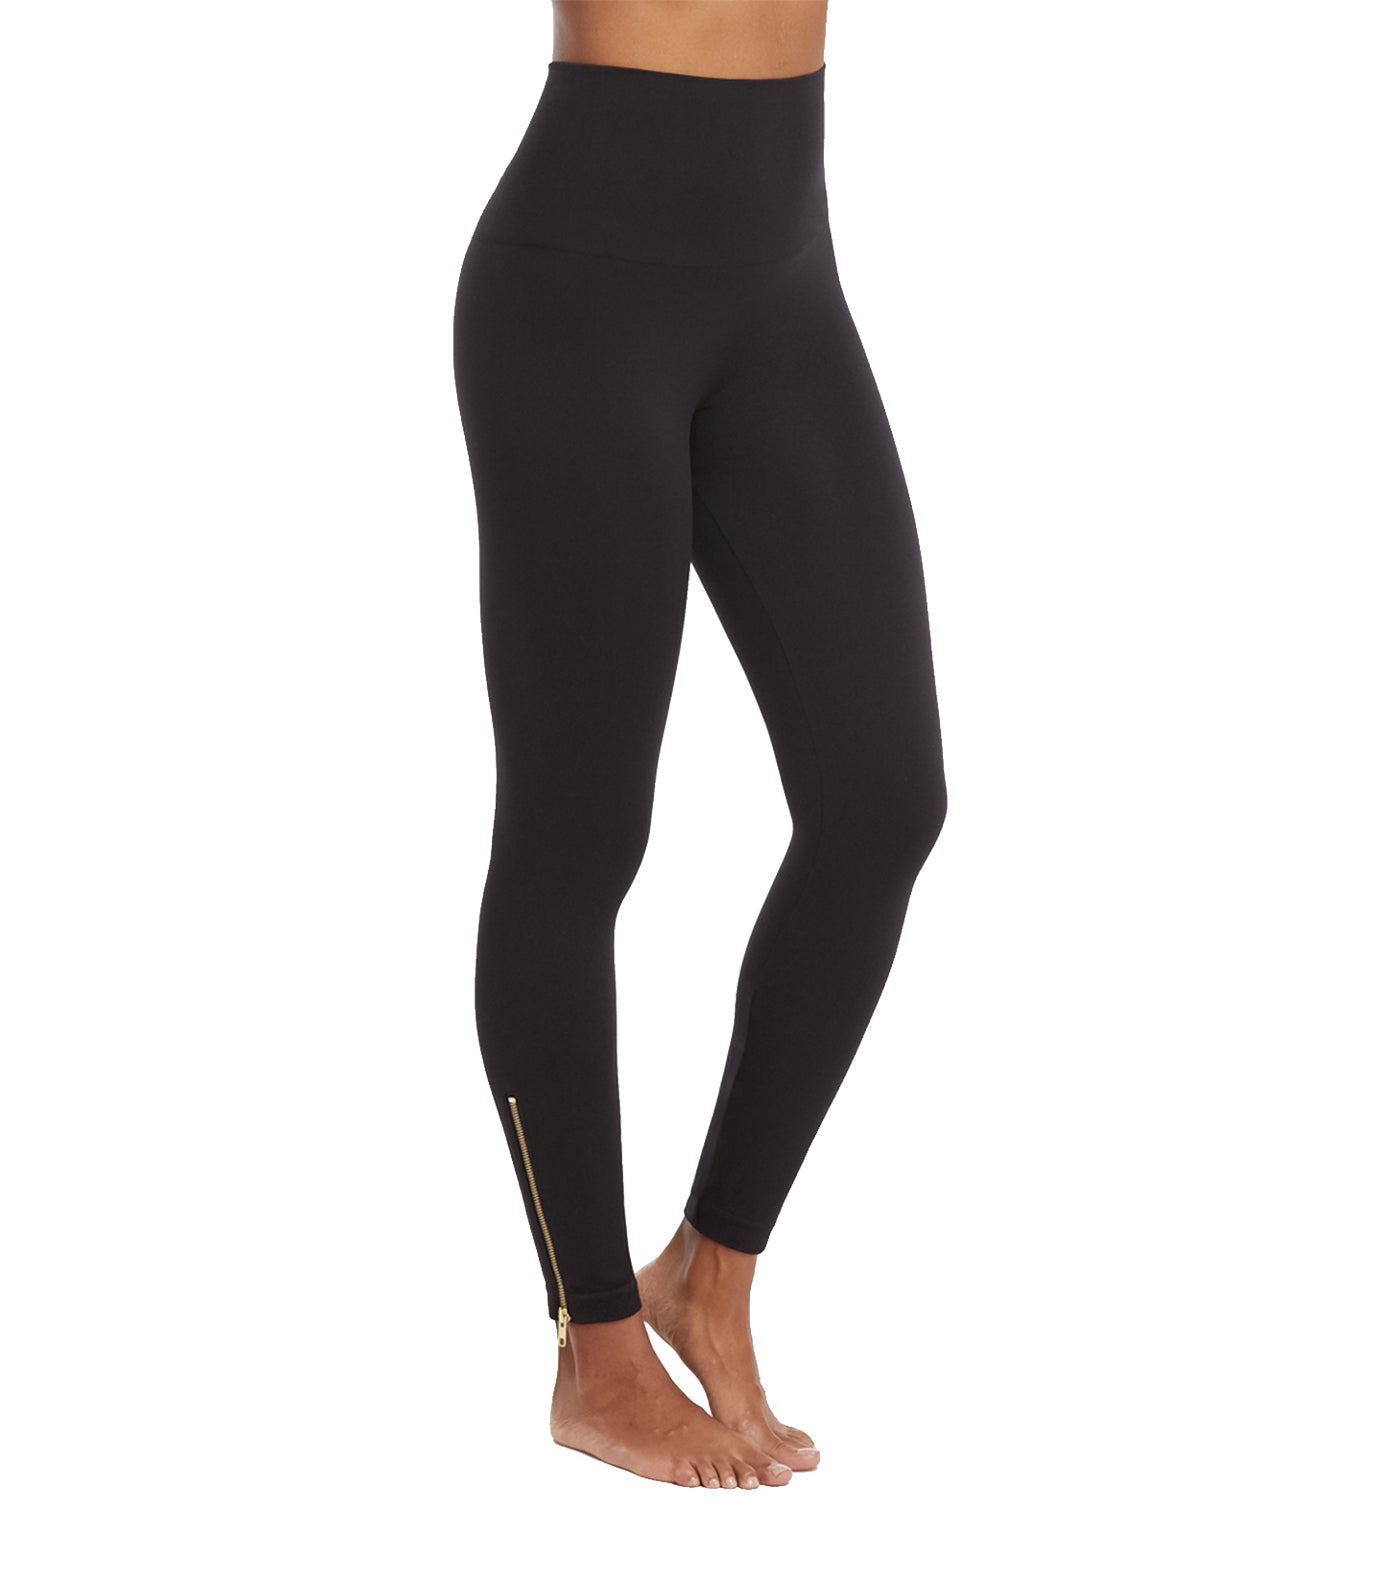 Spanx Curved Lines Seamless Leggings Shapewear Pants Women's Size